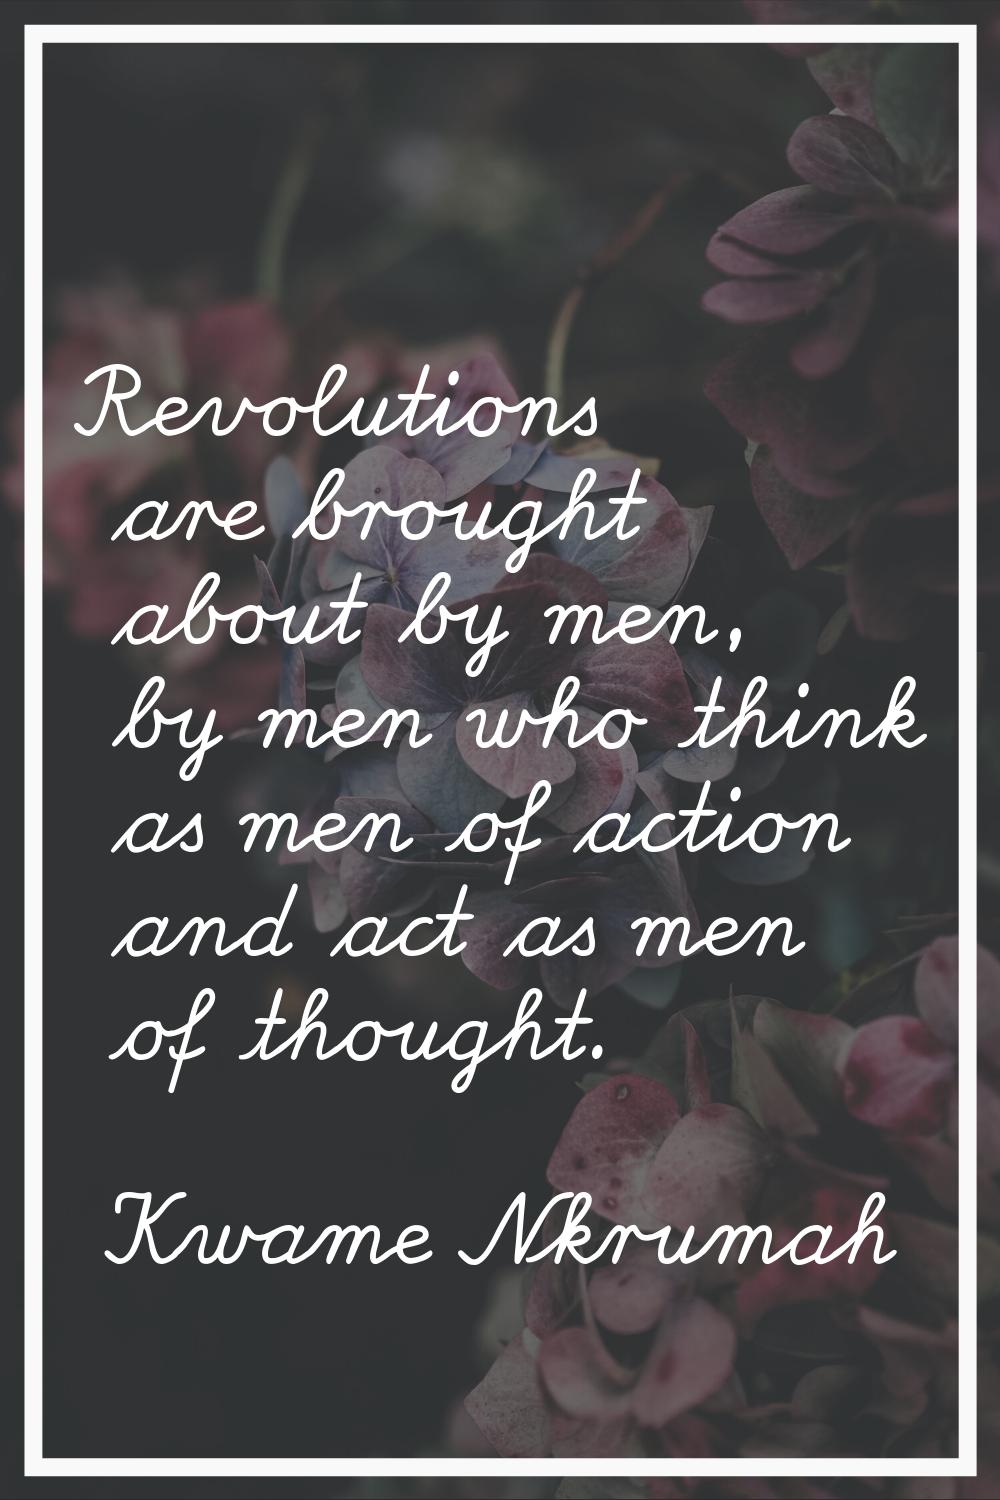 Revolutions are brought about by men, by men who think as men of action and act as men of thought.